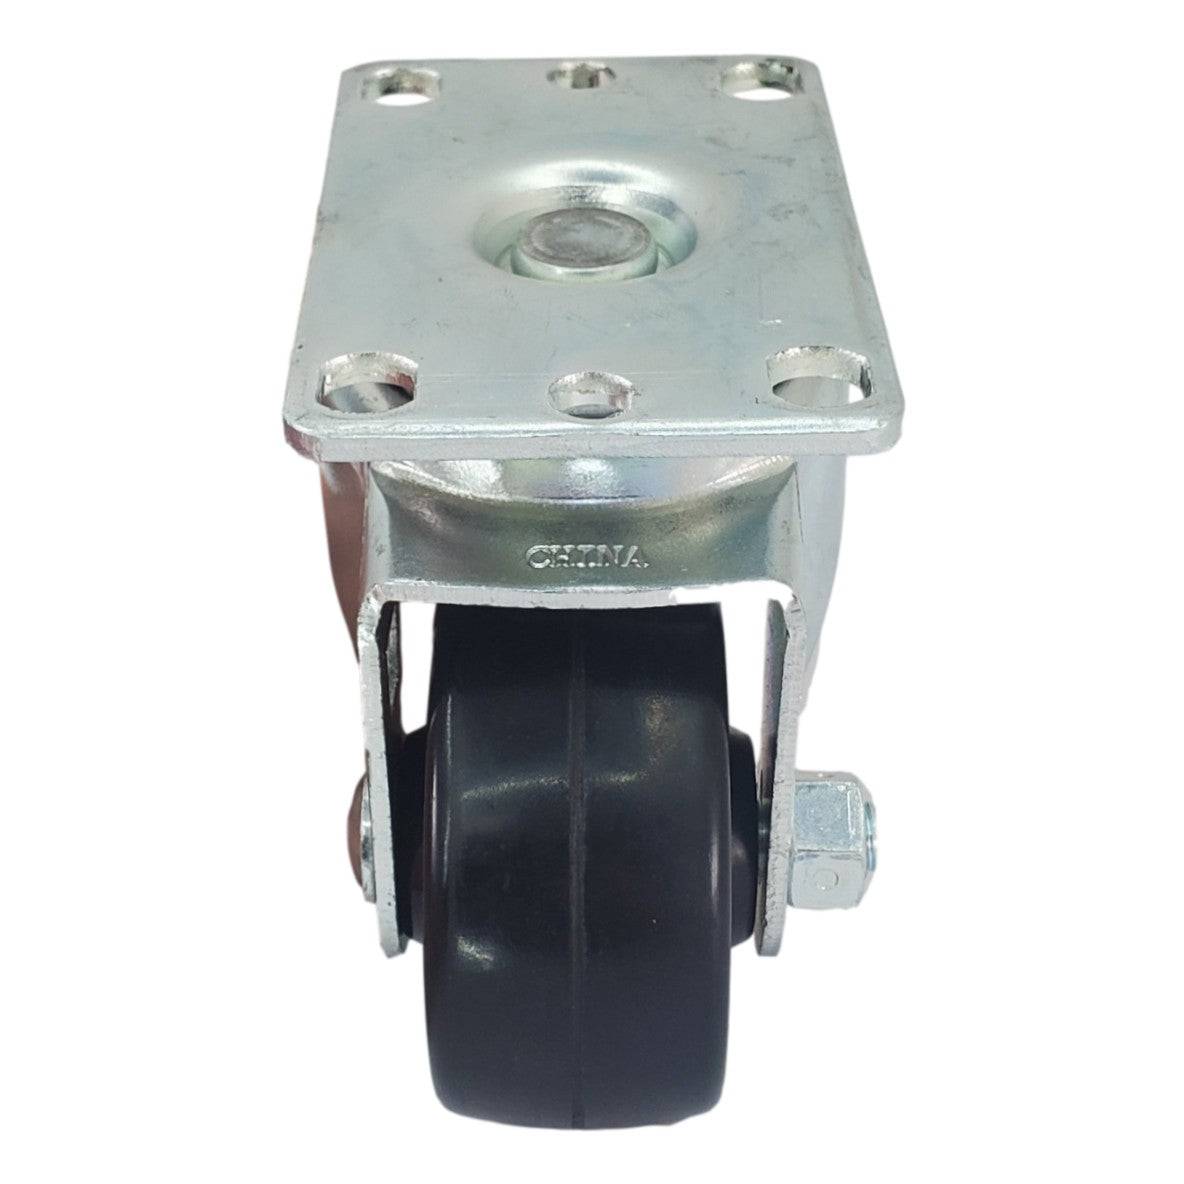 2-1/2" X 1-1/4" Soft Rubber Wheel Swivel Caster - 275 lbs. Capacity (4-Pack) - Durable Superior Casters